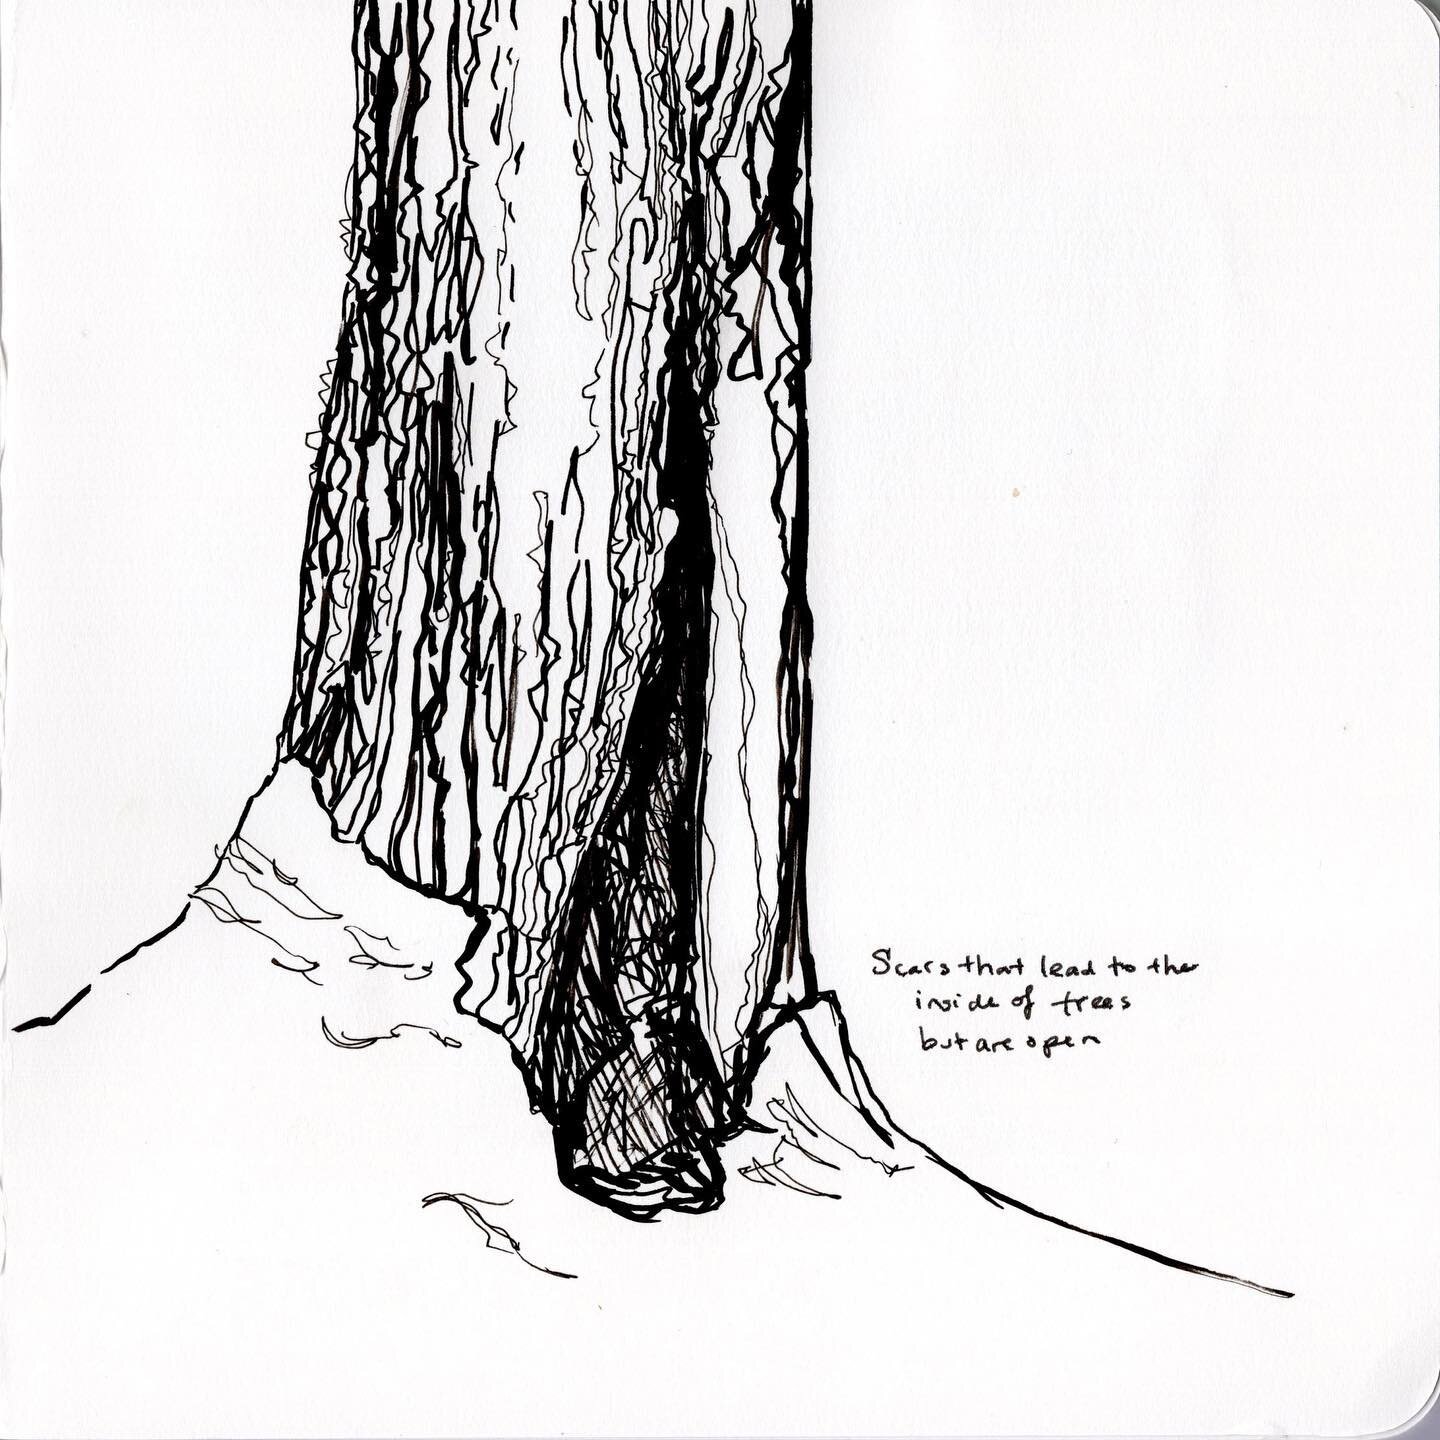 Sketchbook work from earlier this winter hanging out in the Northern Hardwood forest in Vermont. I loved spending time with all these old trees and the open forest. 

#sketchbook #trees #sketching #penandink #naturejournal